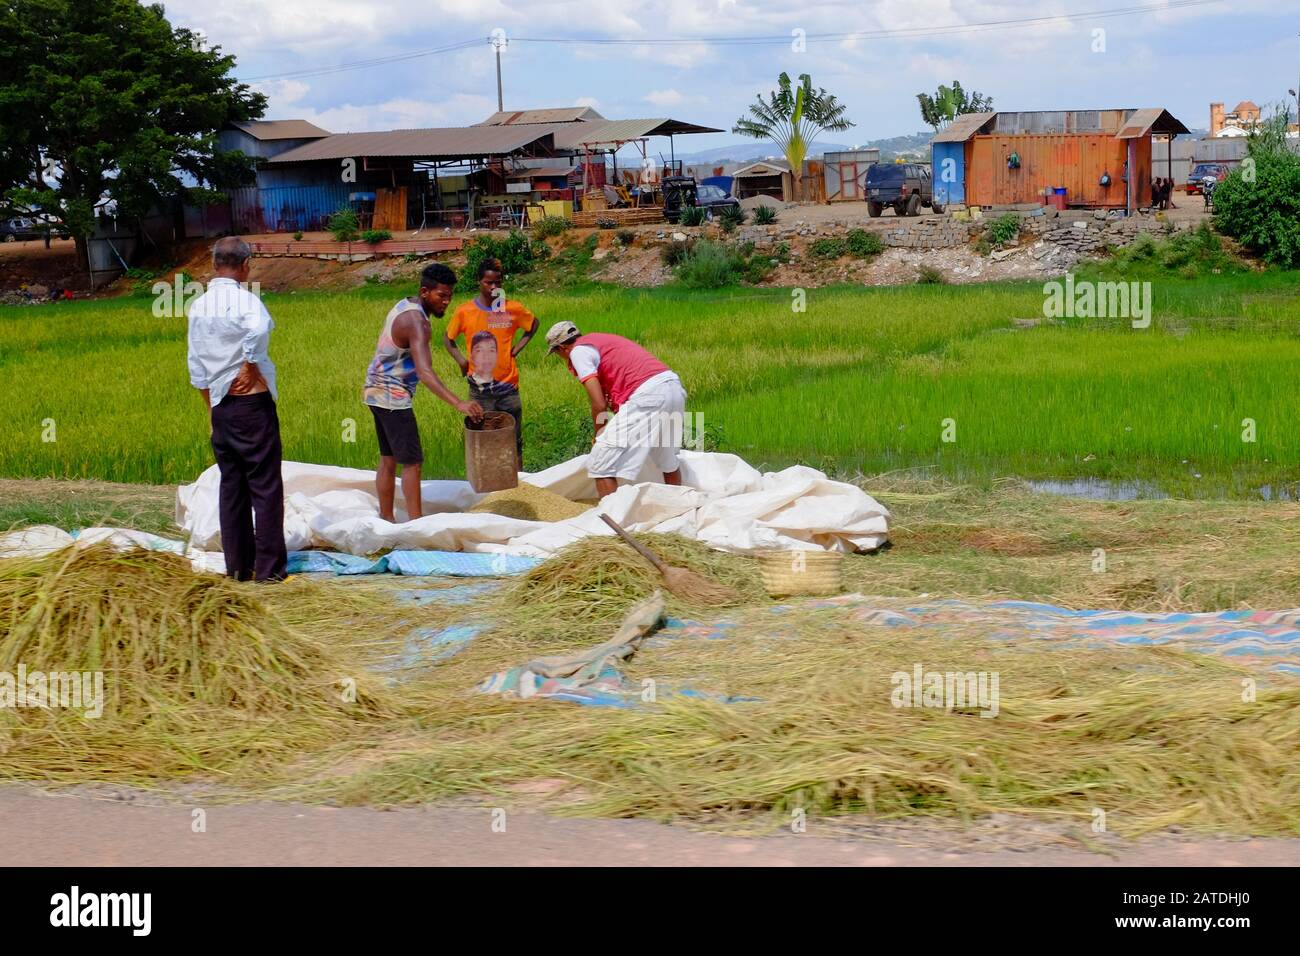 People gather rice near Antananarivo, the capital of Madagascar, one of the poorest countries in Africa. Stock Photo